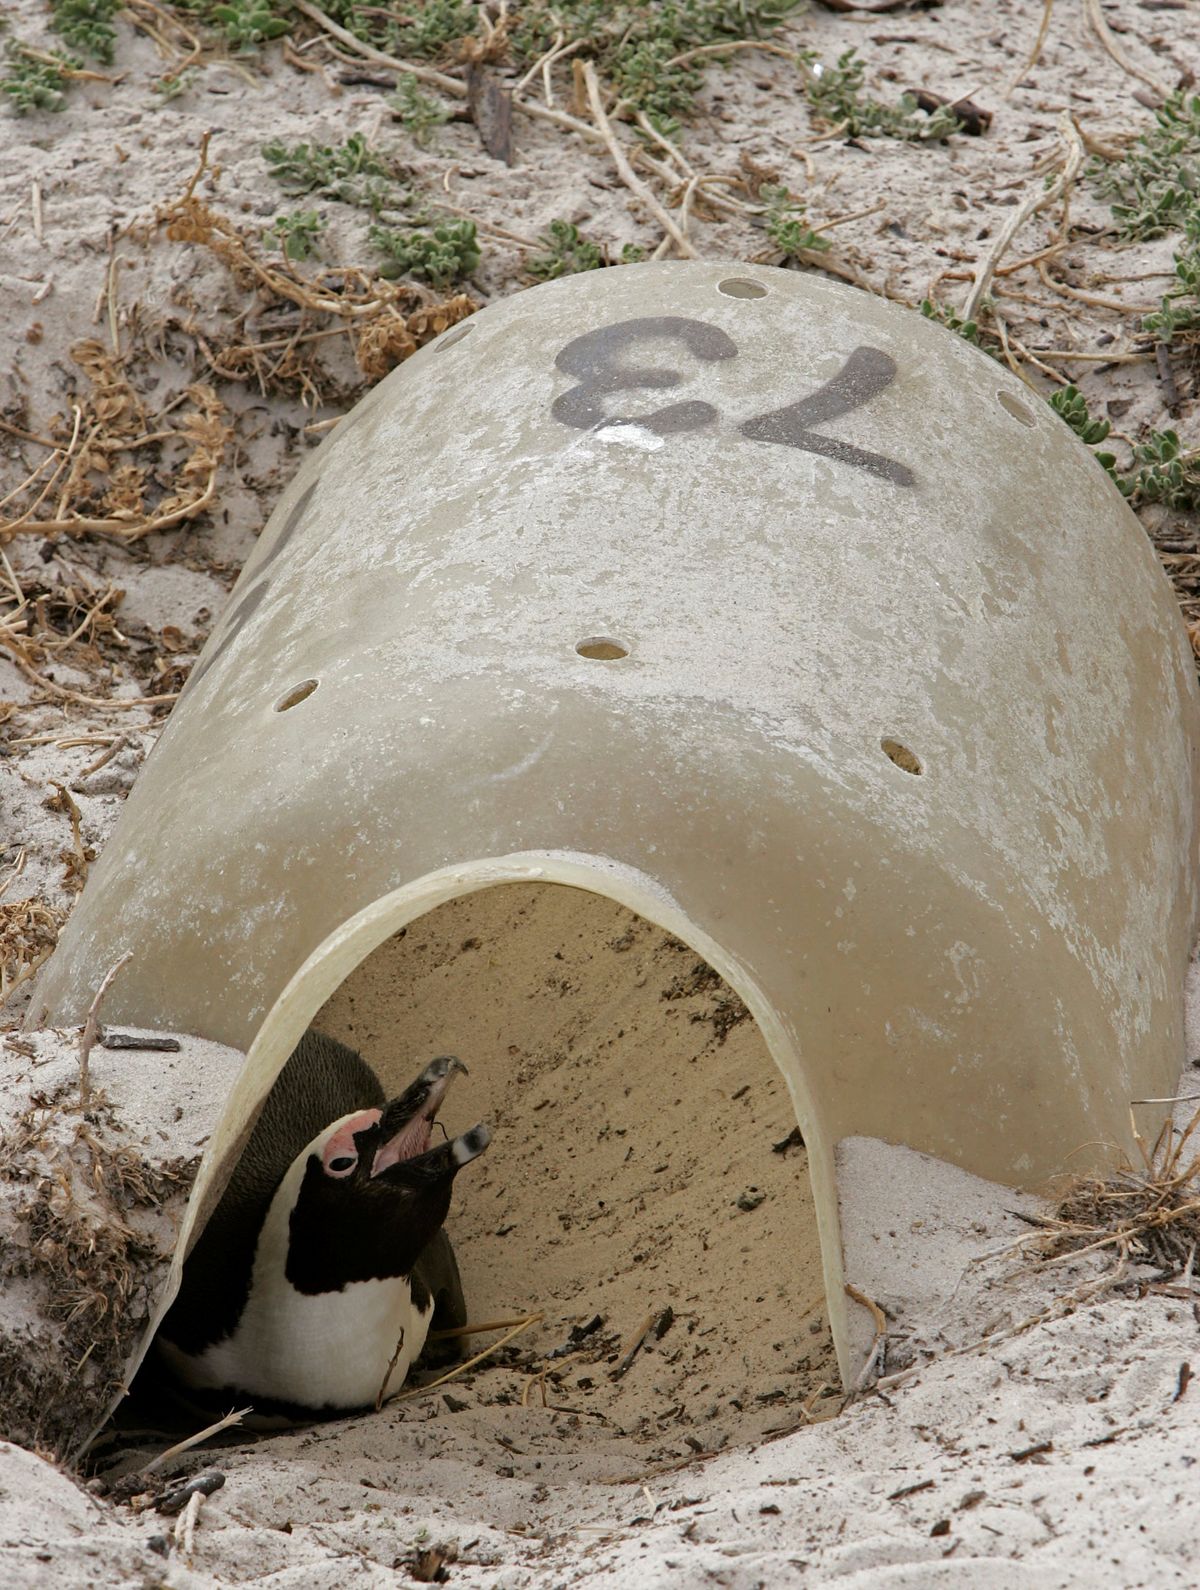 A penguin rests in a nesting box at a national park in Simons Town in early March. (The Spokesman-Review)